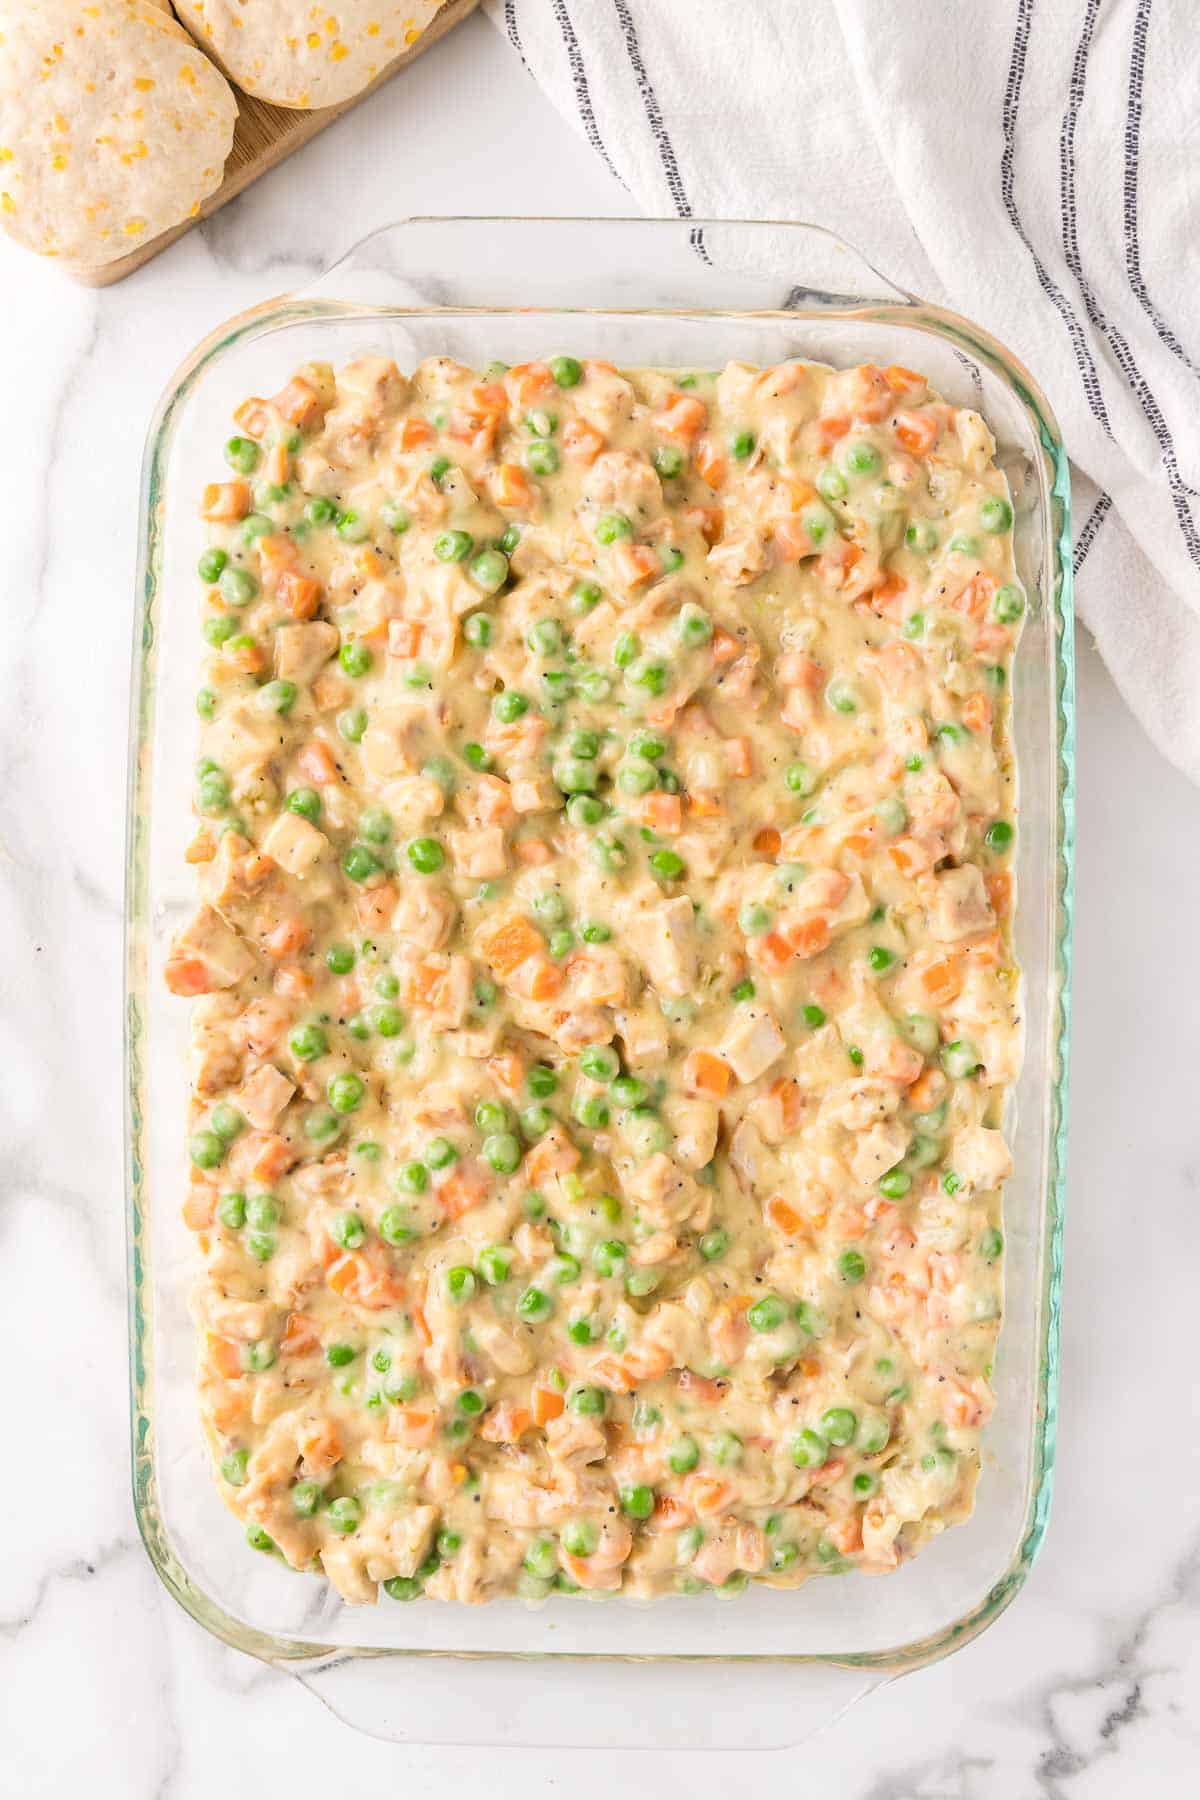 The chicken pot pie filling is spread evenly in a 9 by 13 inch baking dish